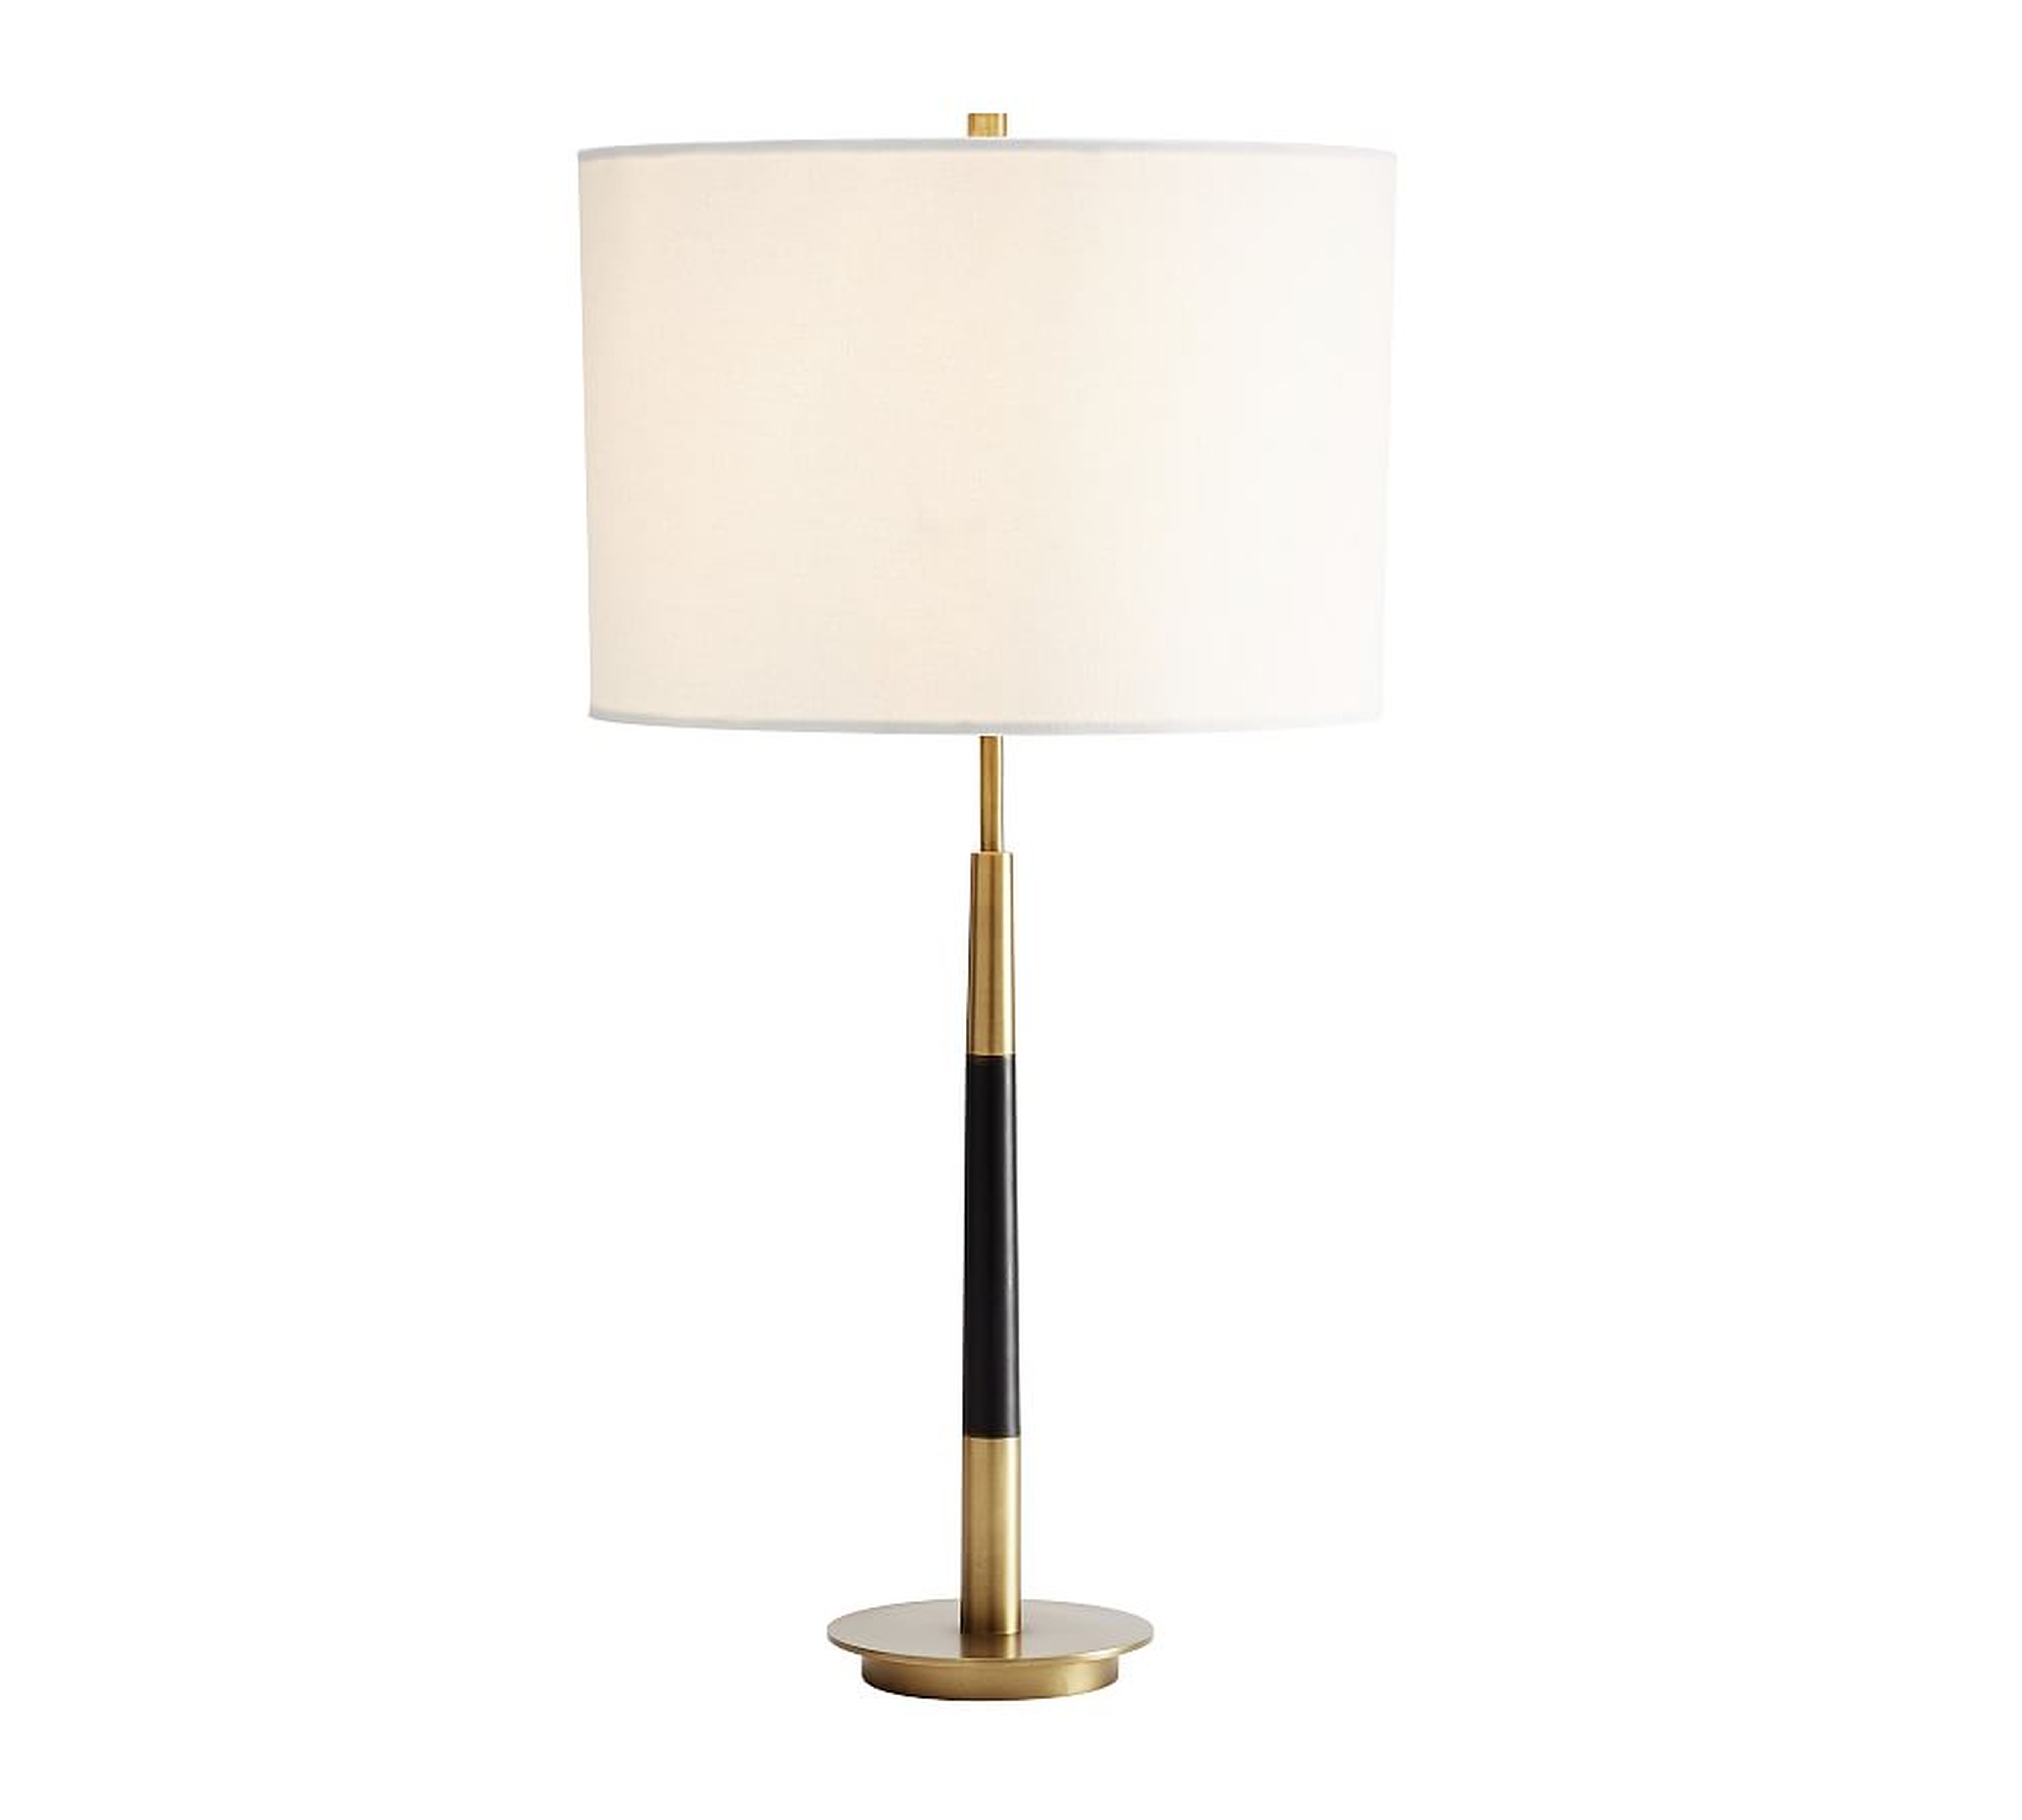 Reese Metal 24" Table Lamp, Tumbled Brass, Large - Pottery Barn